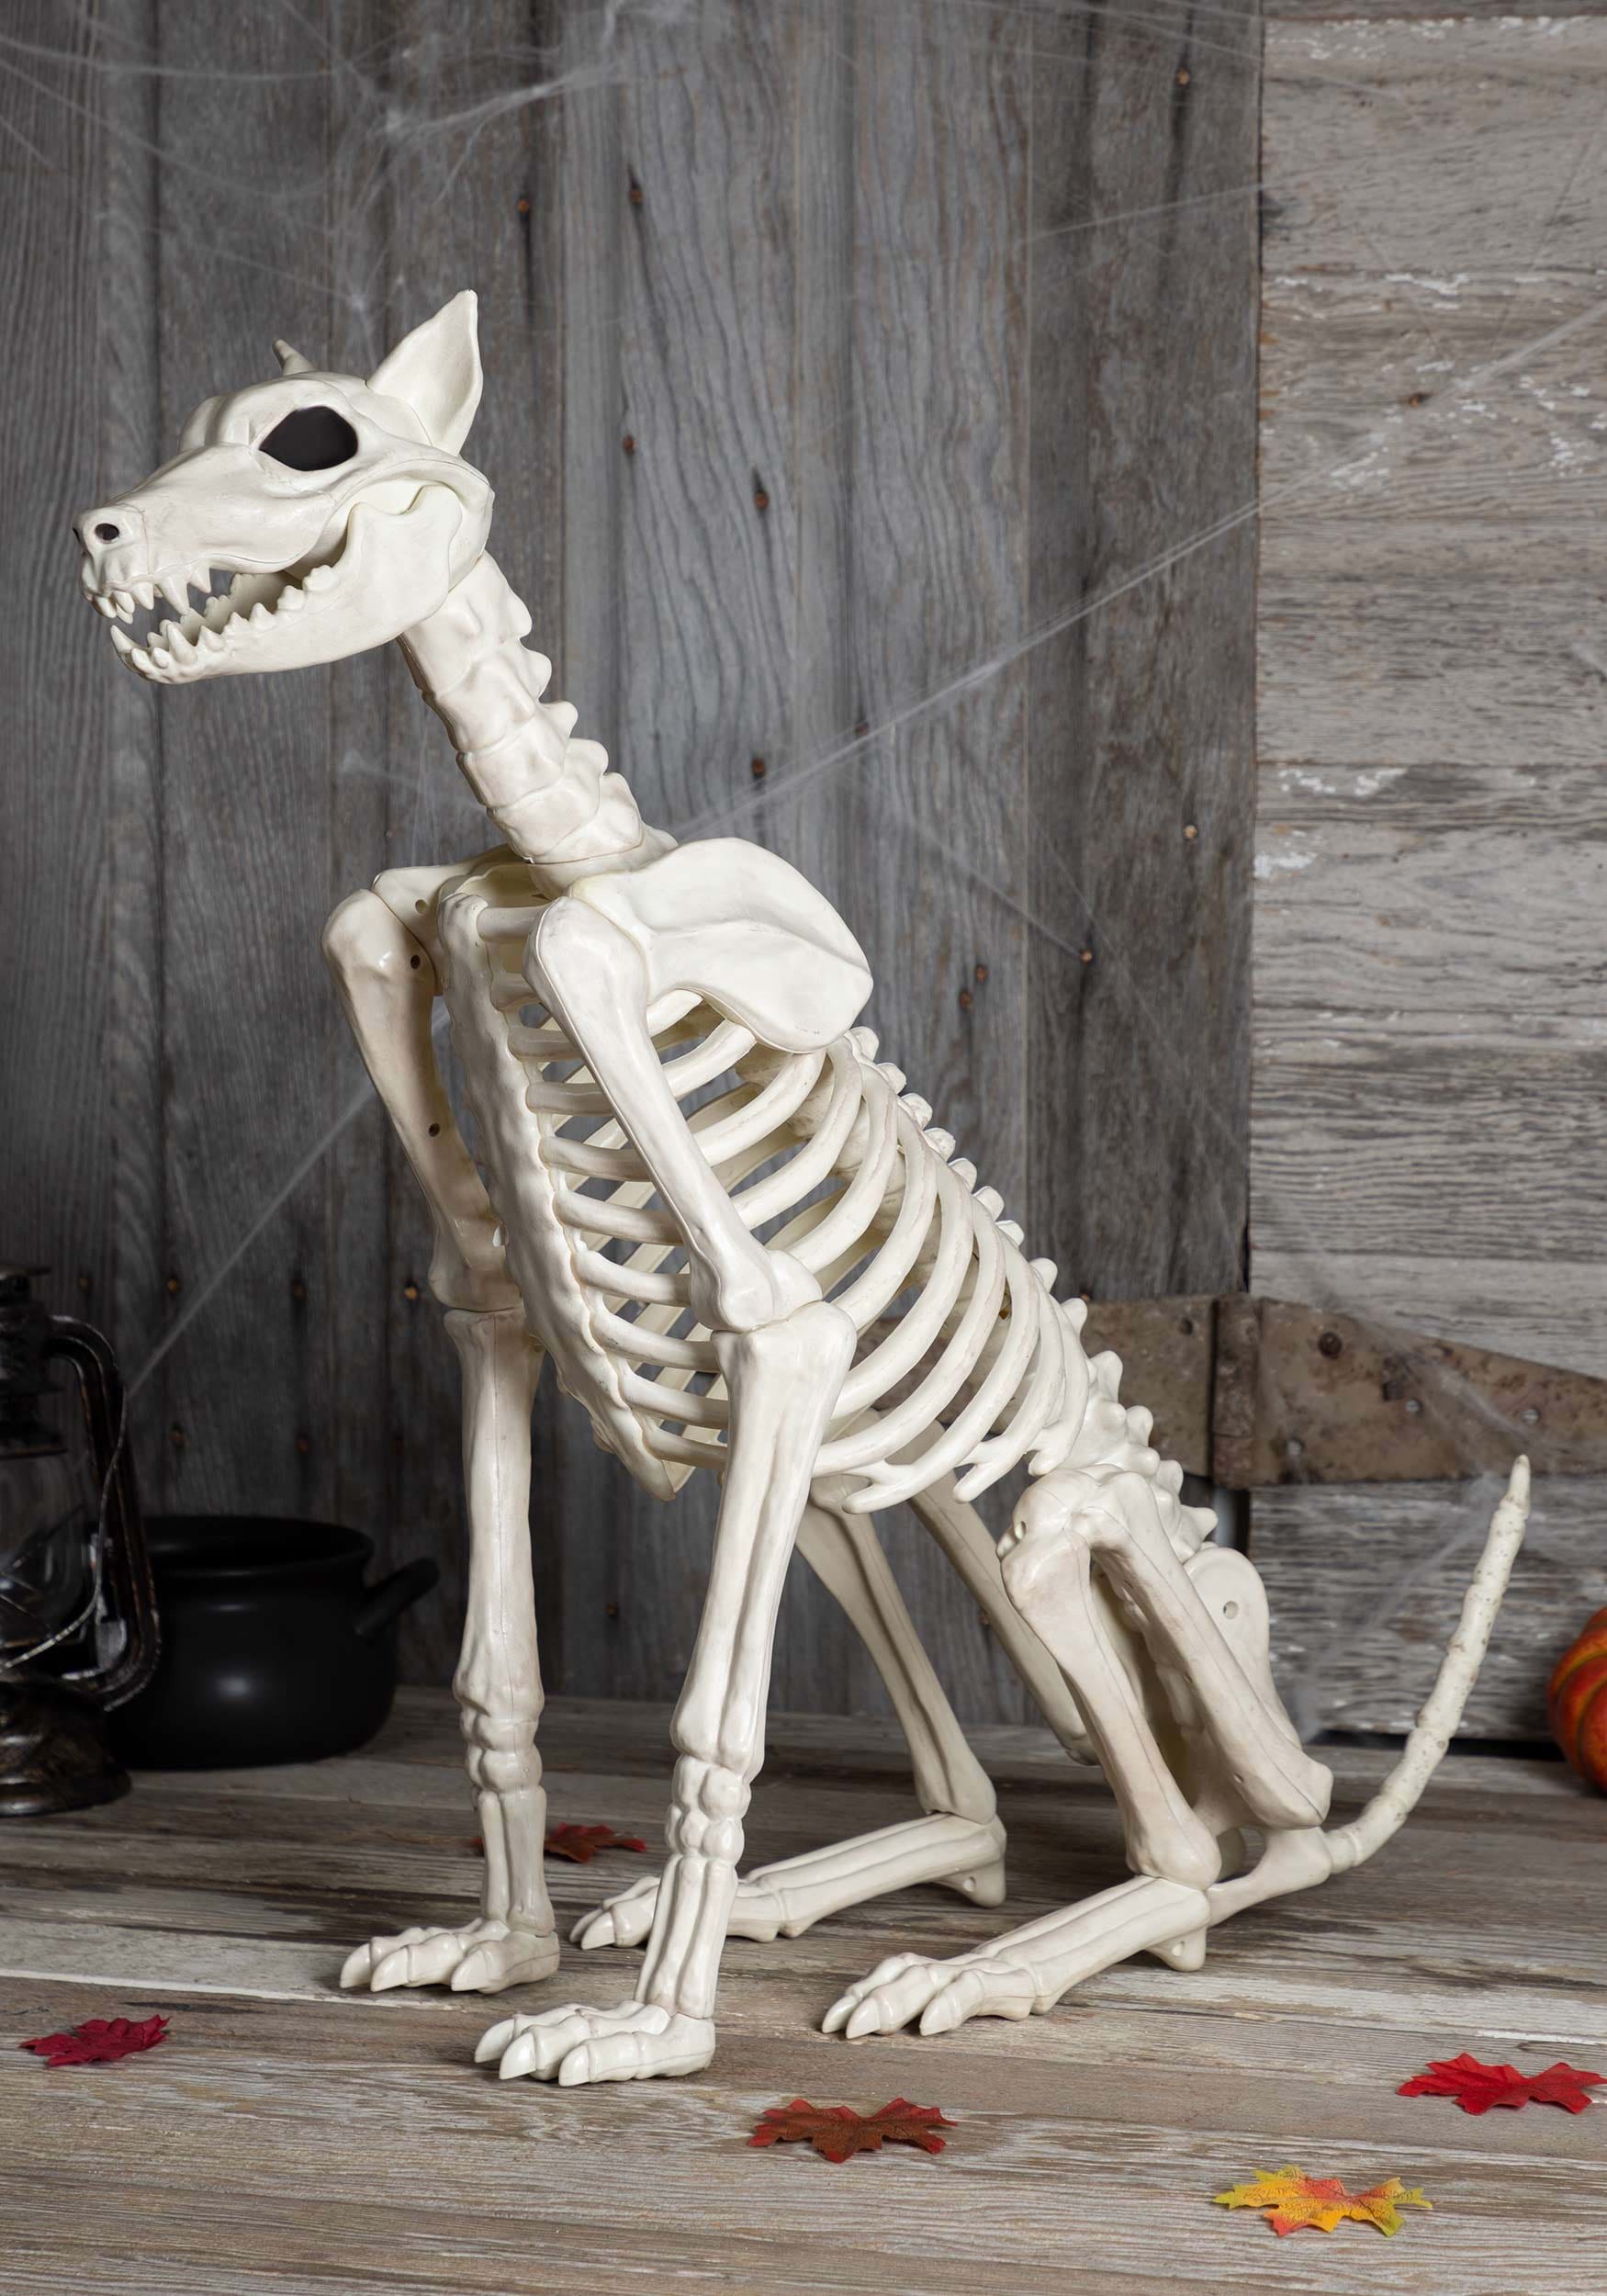 https://images.halloweencostumes.ca/products/39216/1-1/spike-the-skeleton-dog.jpg